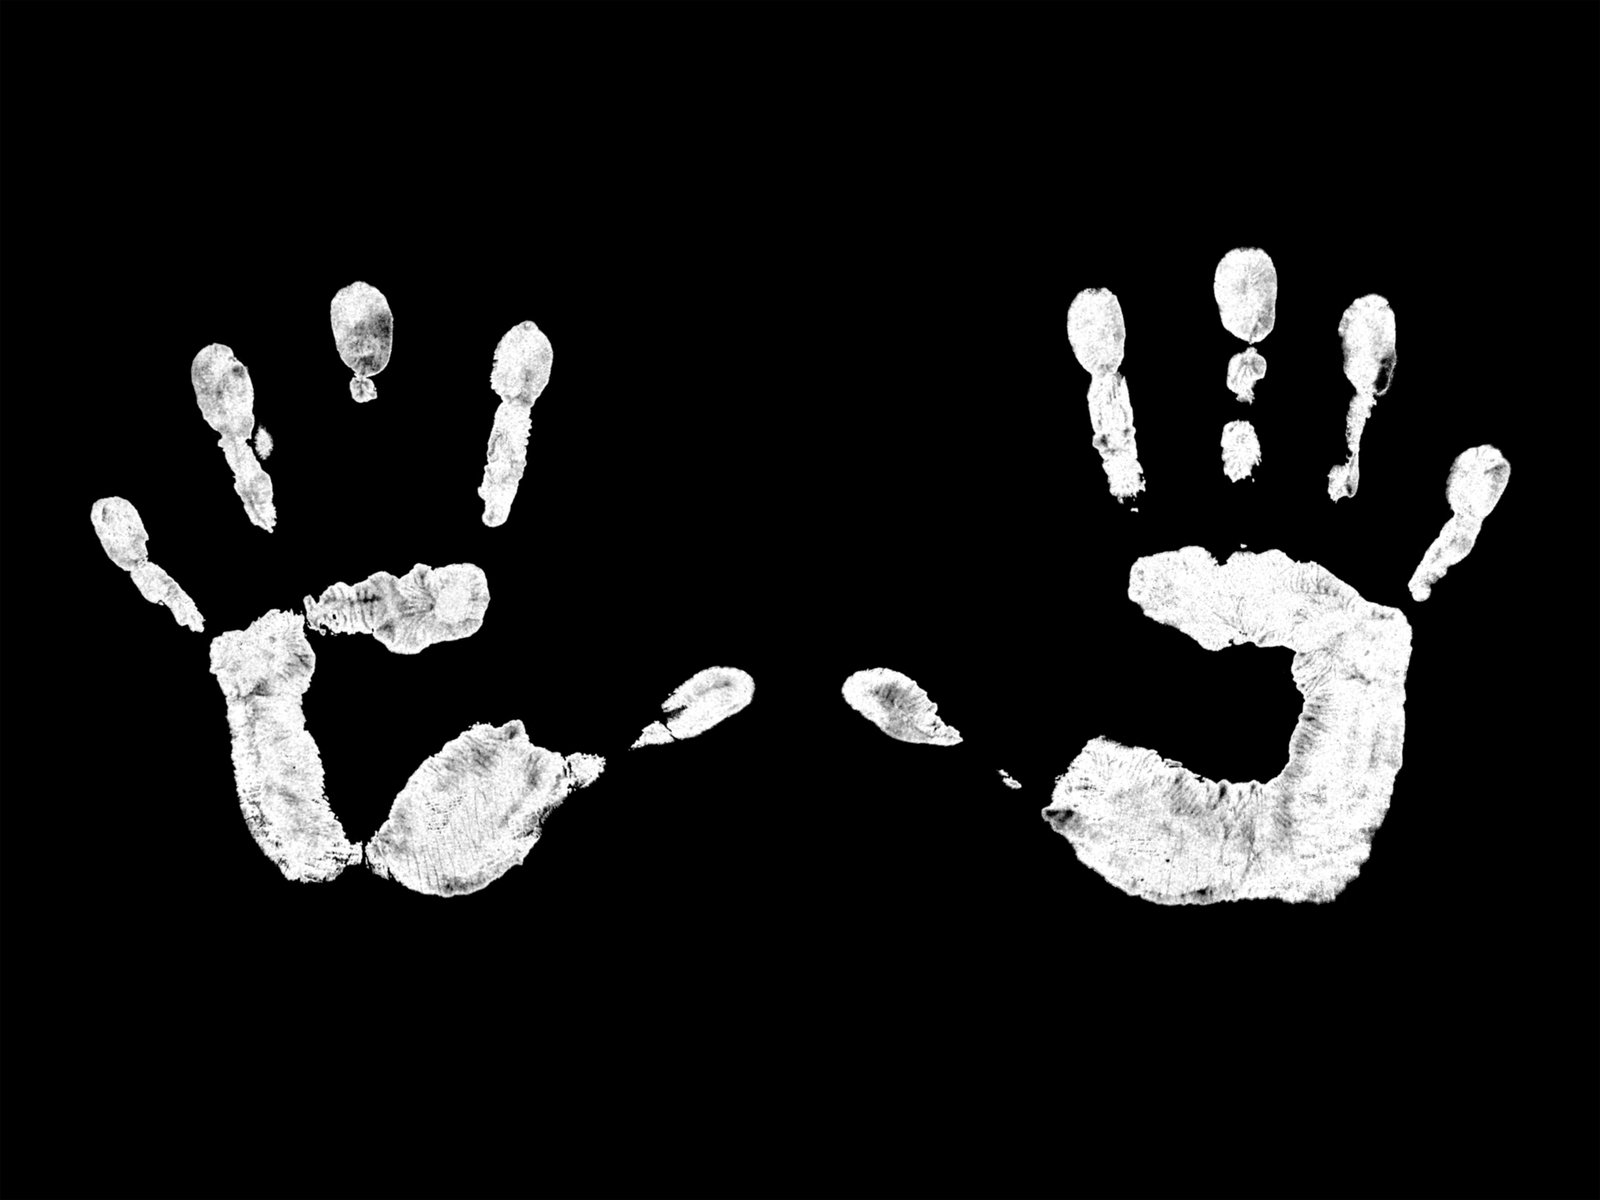 handprints are white with gray highlights in the middle